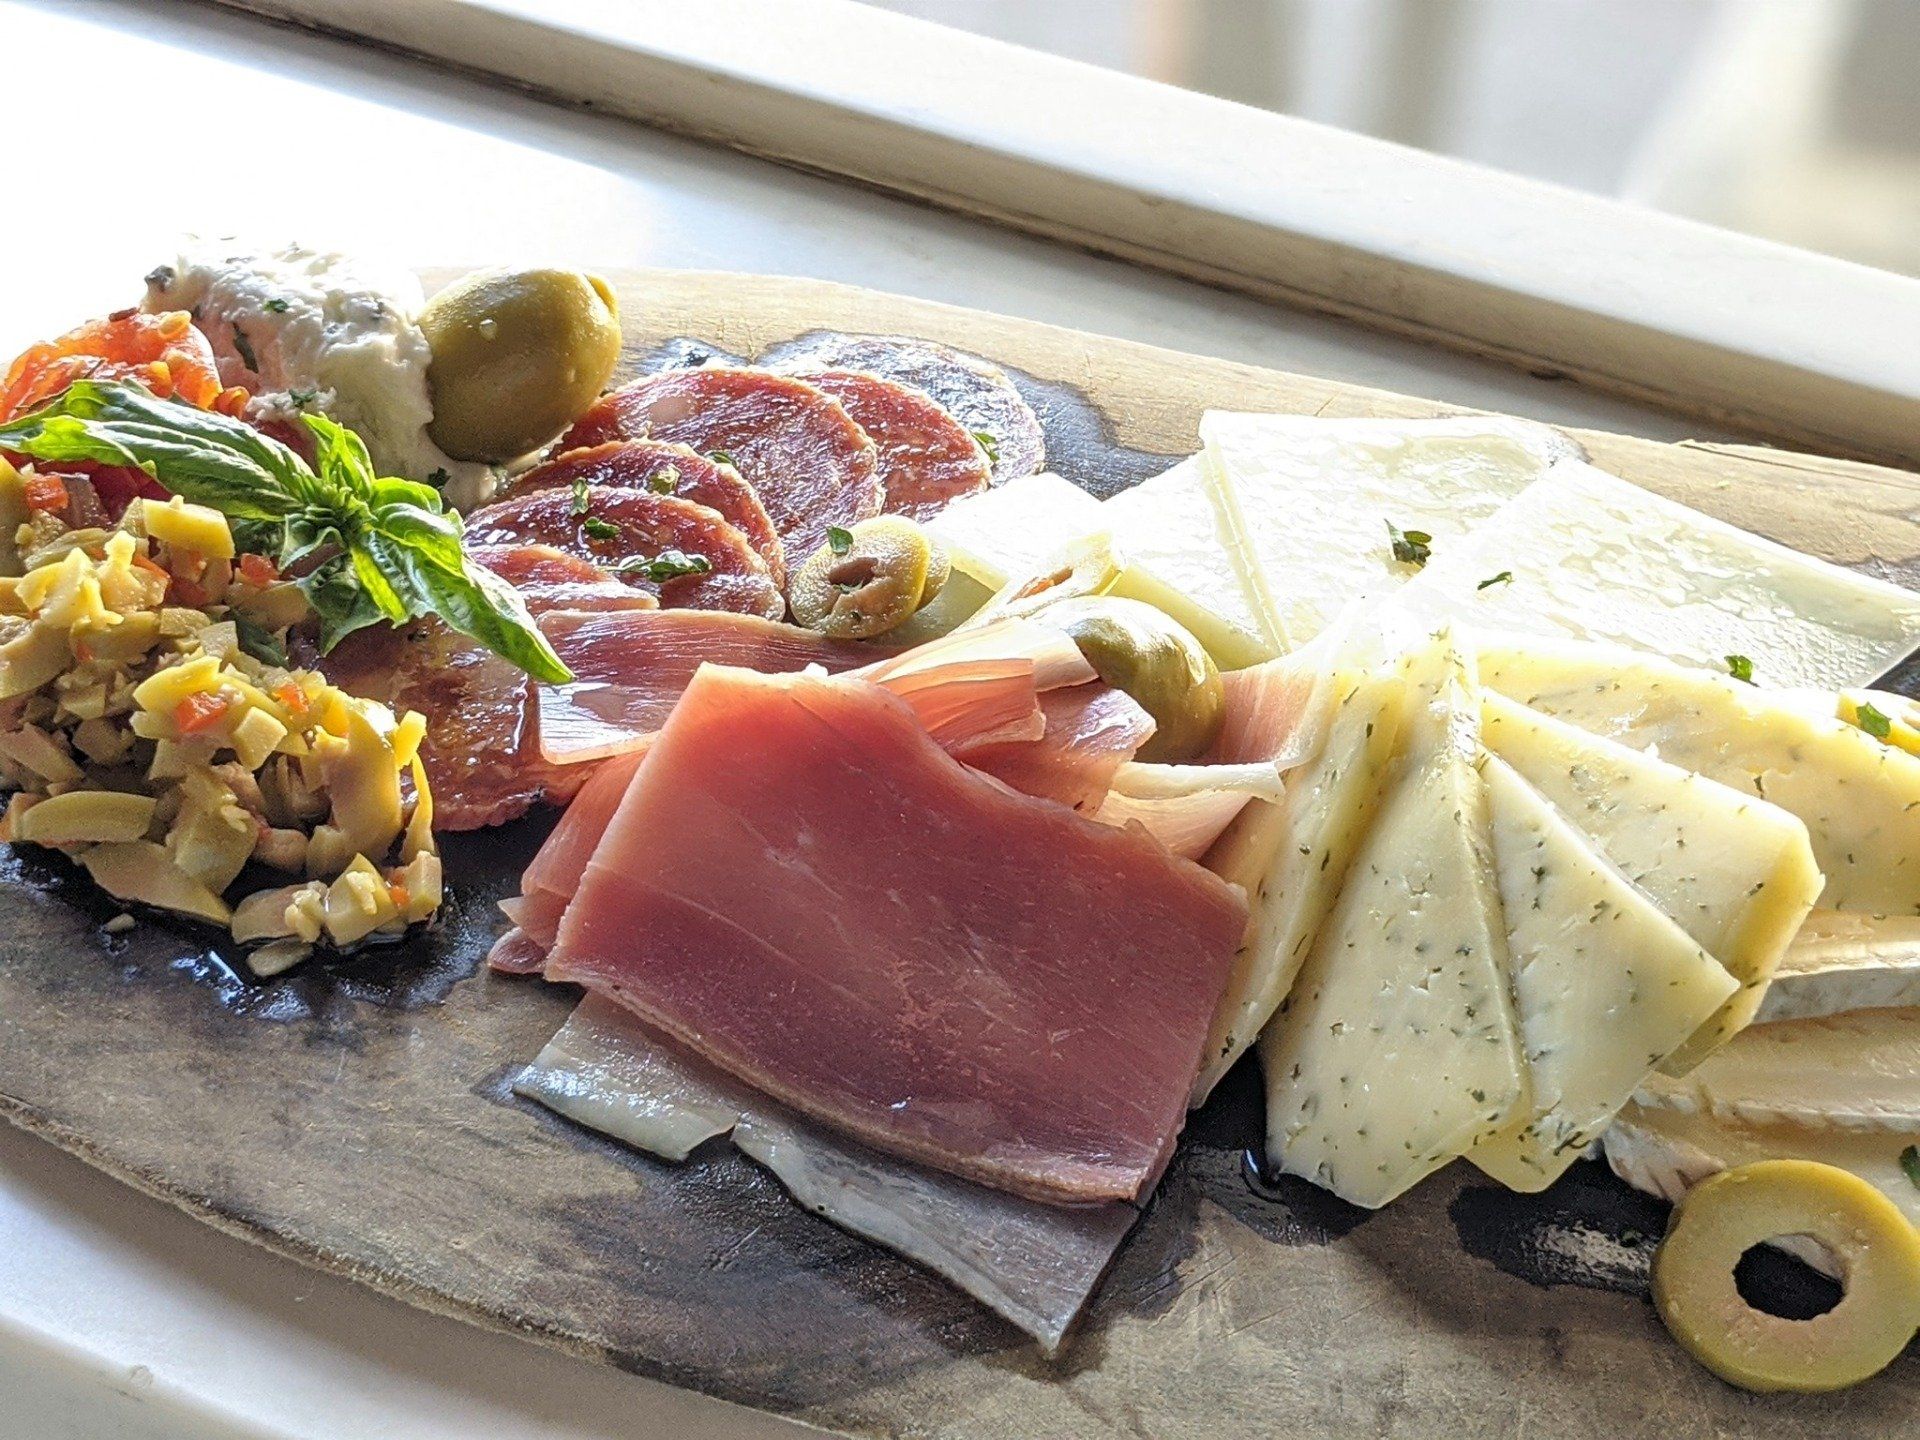 Customize your Charcuterie